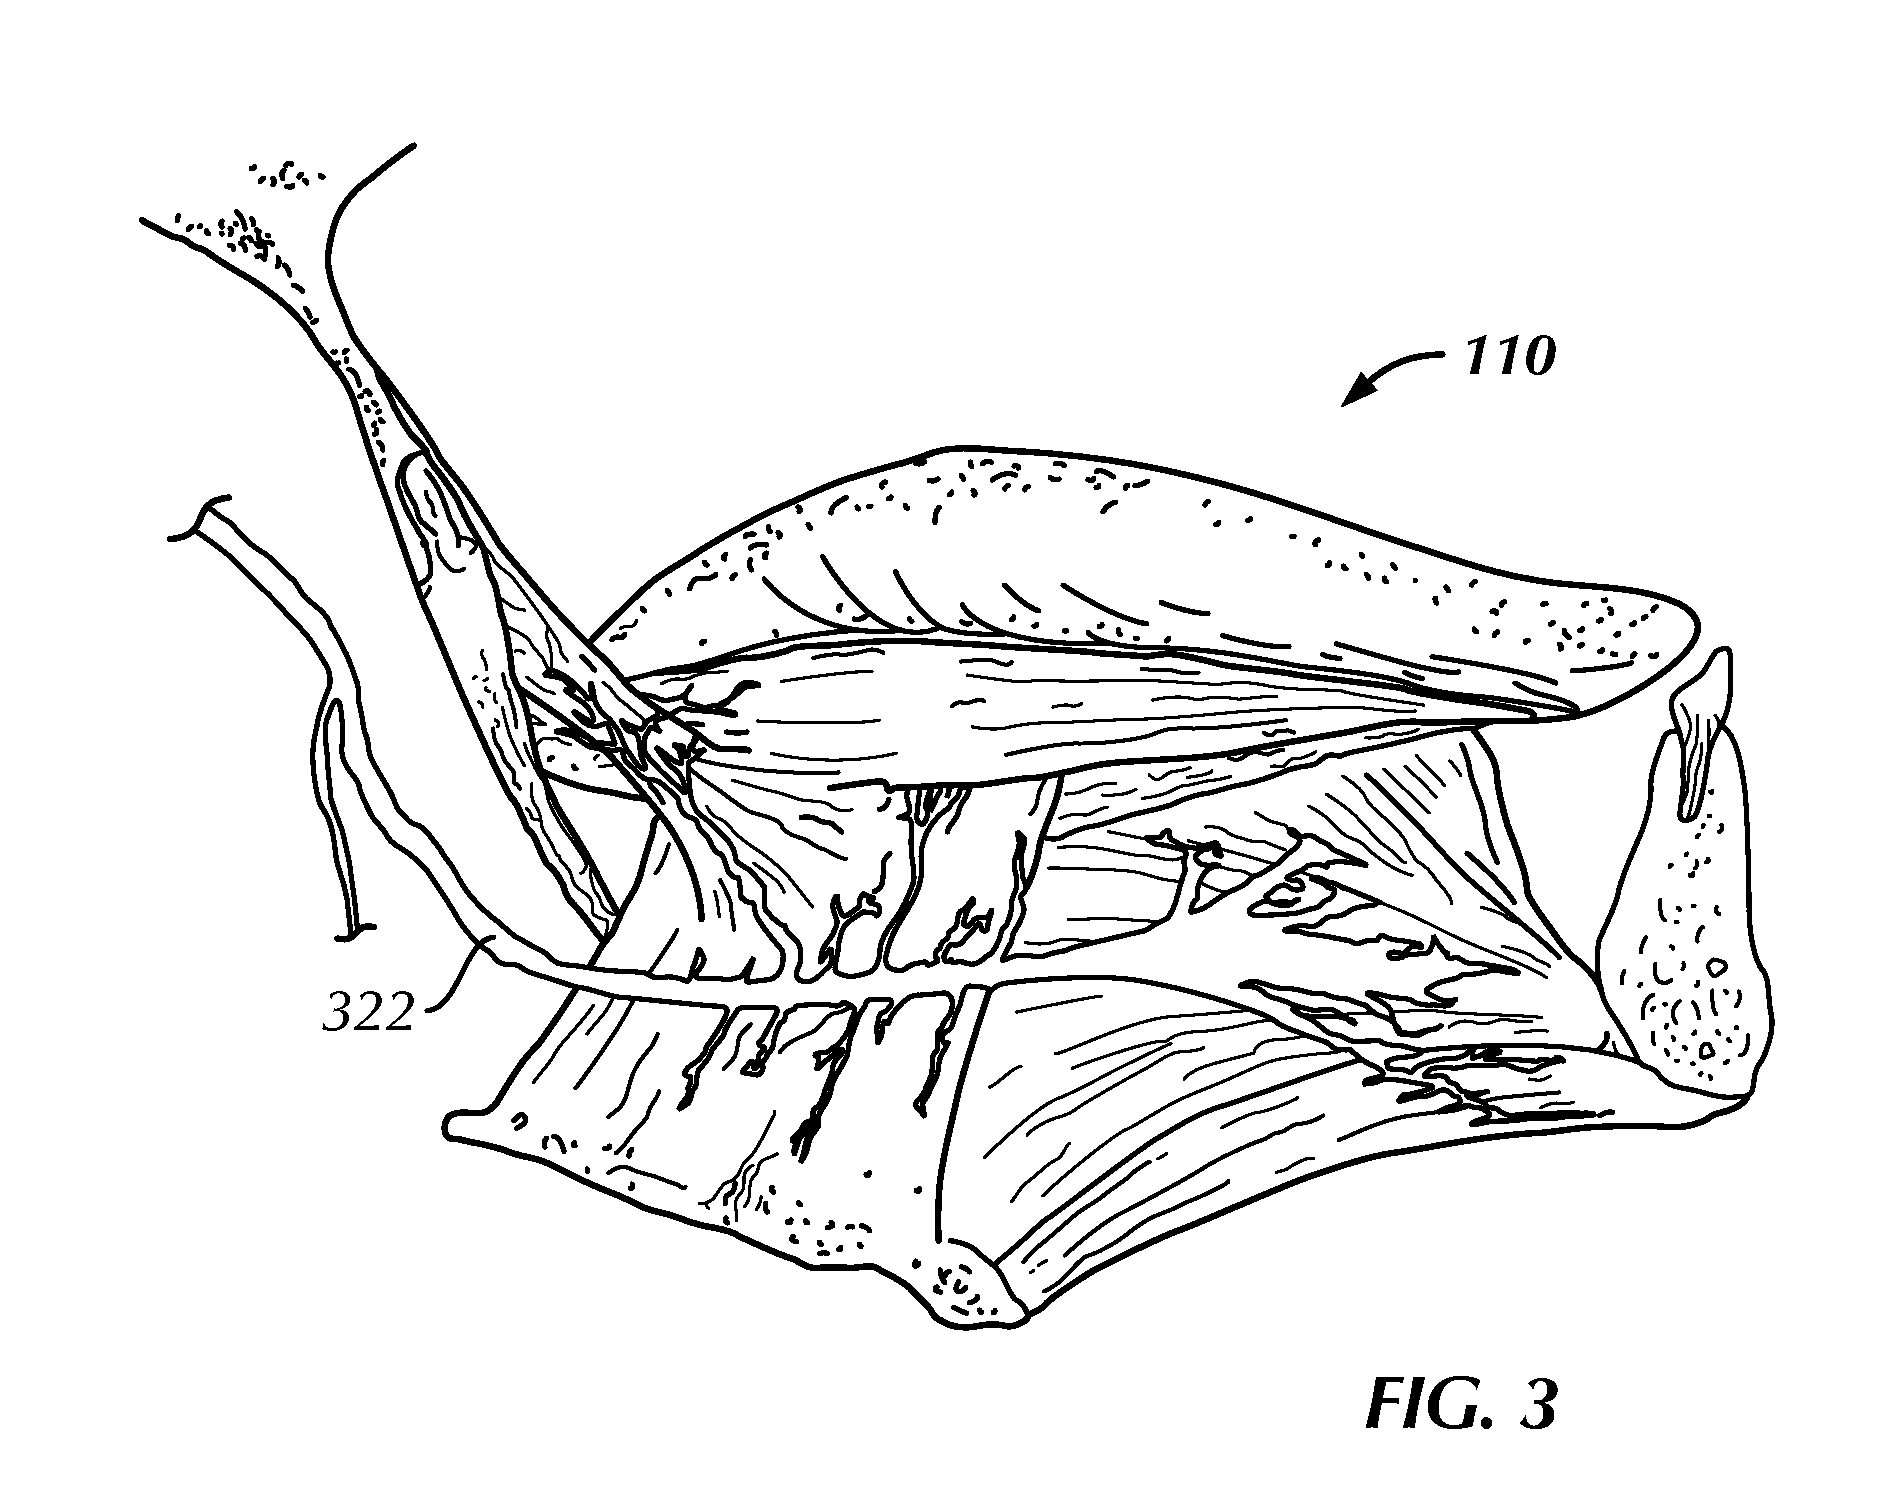 System For Stimulating A Hypoglossal Nerve For Controlling The Position Of A Patient's Tongue